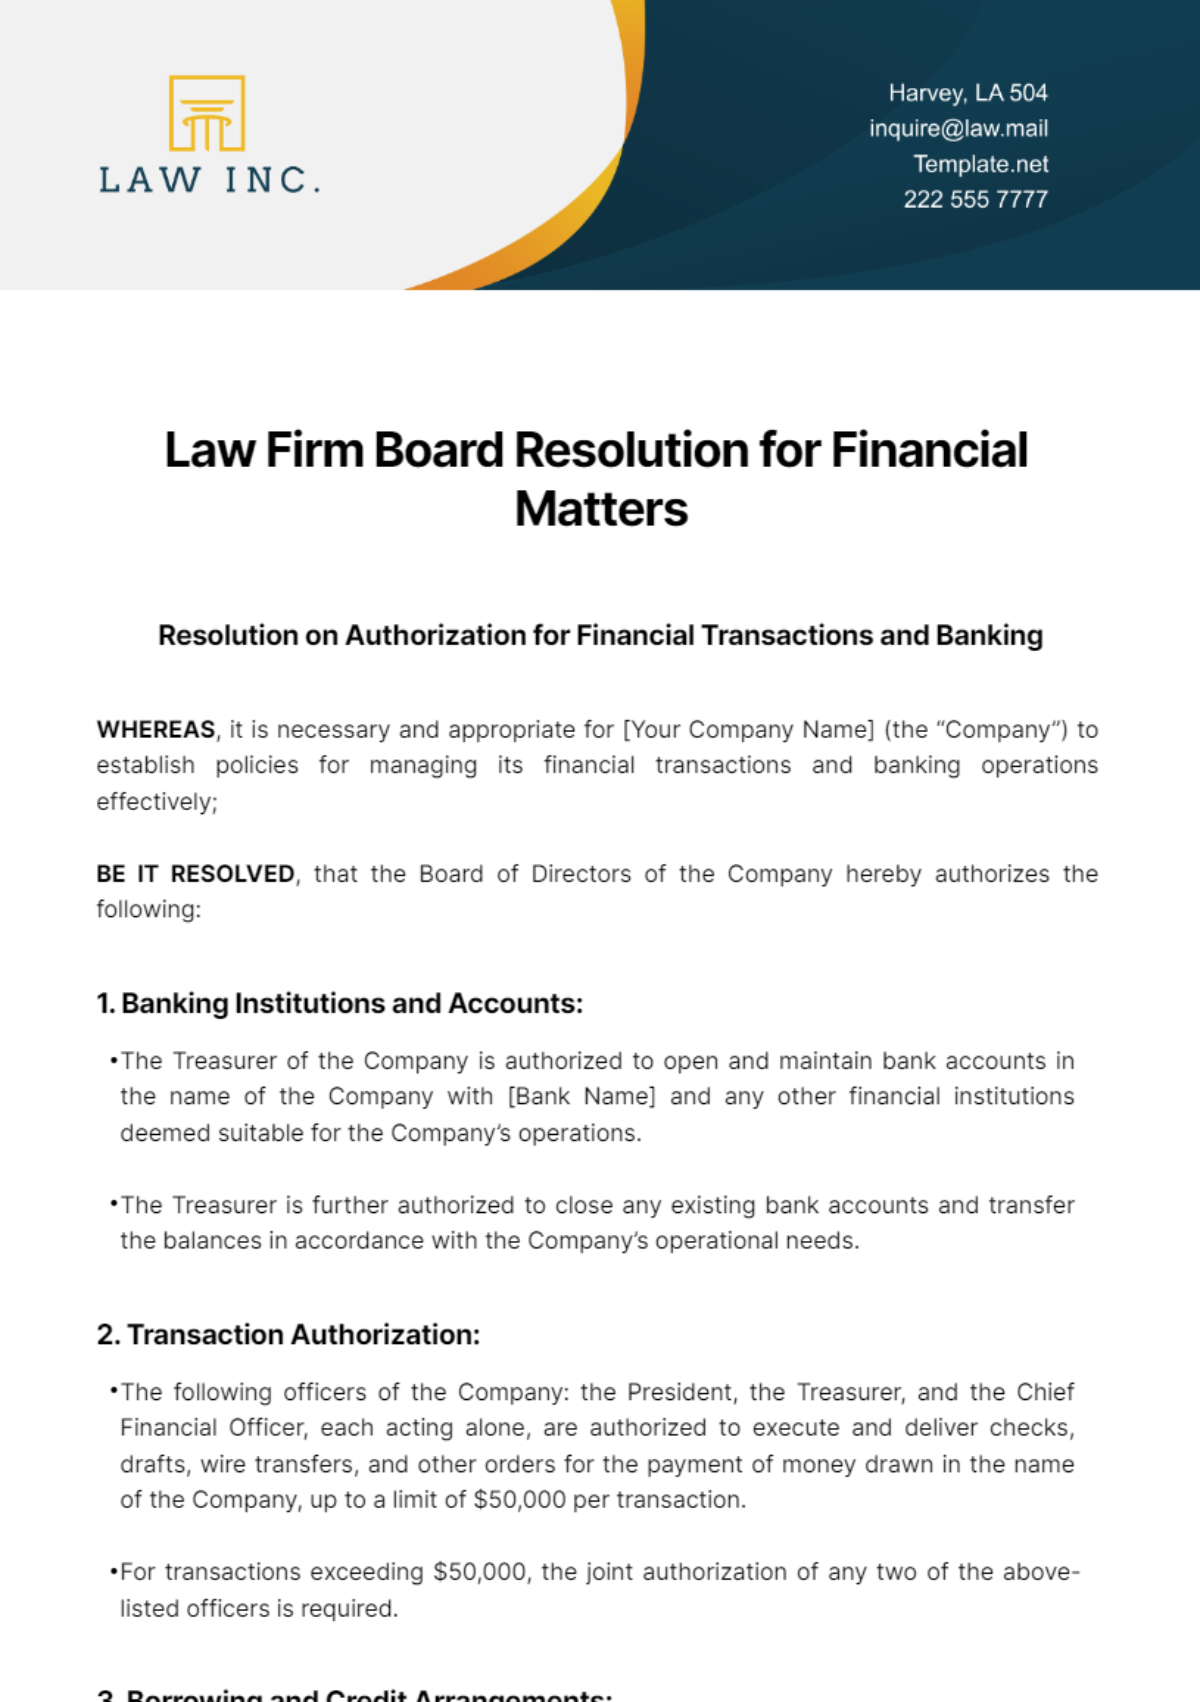 Free Law Firm Board Resolution for Financial Matters Template